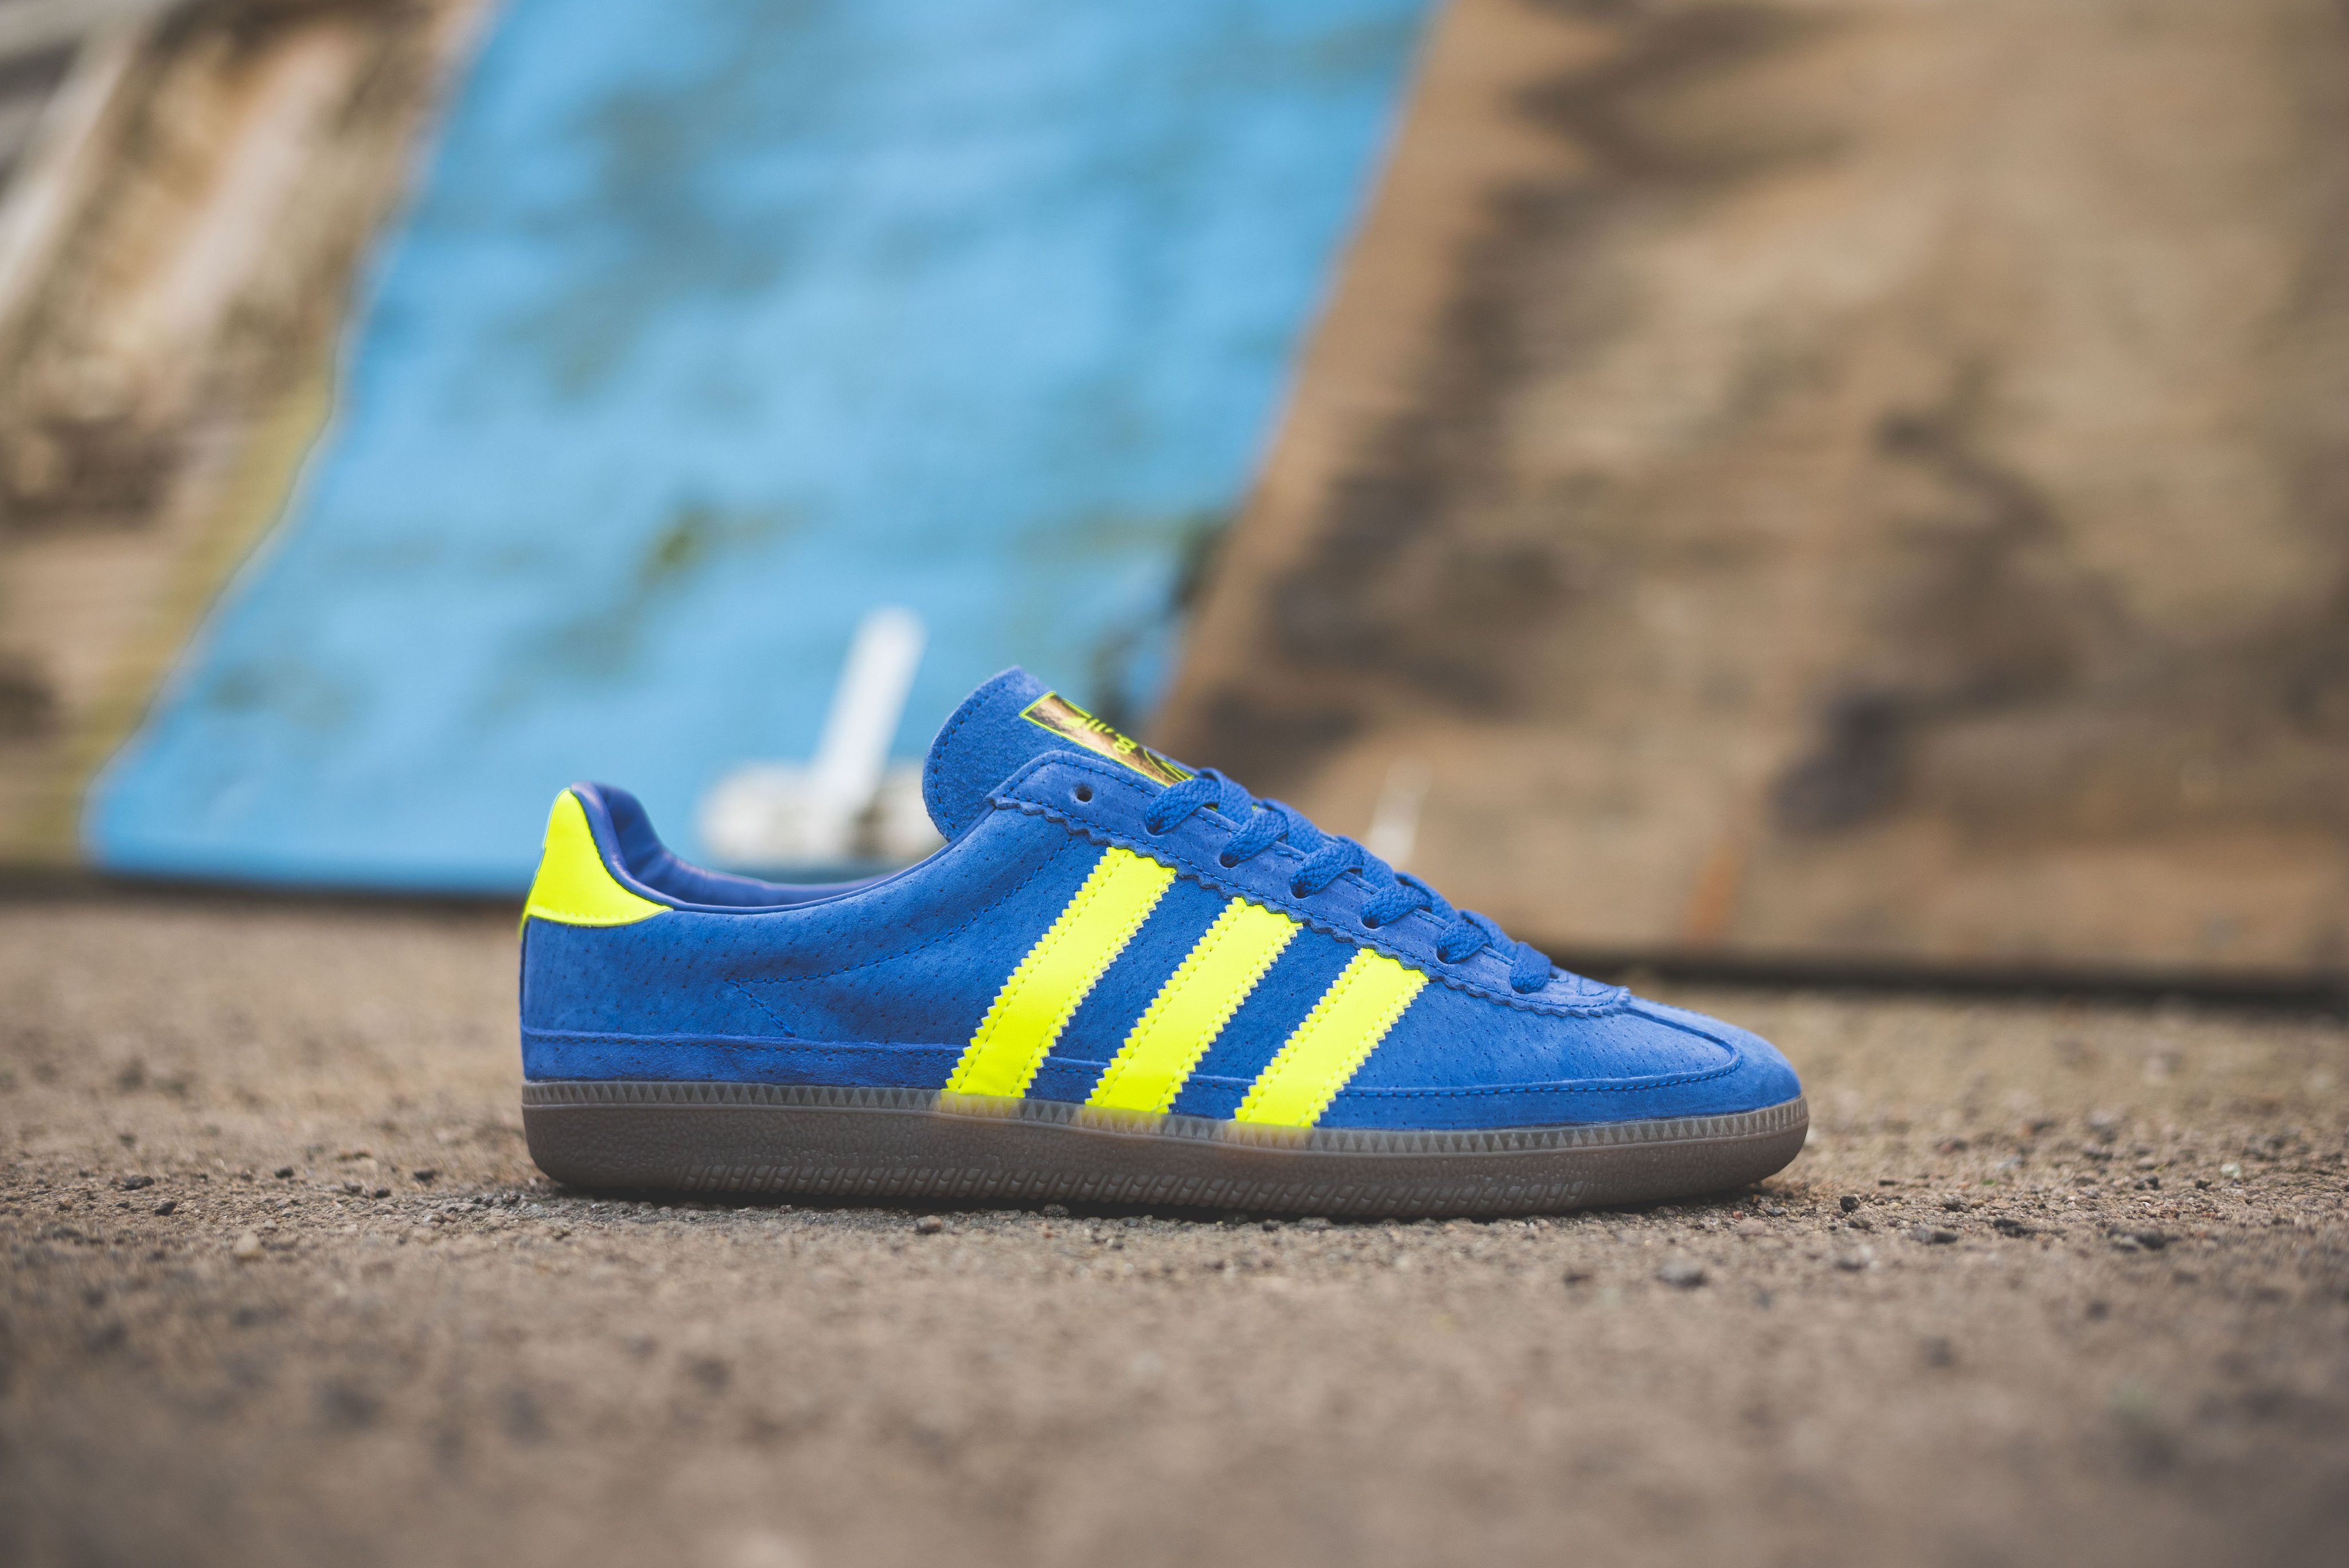 HANON on "Our ONLINE RAFFLE for the adidas Whalley SPZL is live Thursday 7th of March 12:00GMT #hanon #adidas #spezial https://t.co/KcKQM3vGfw https://t.co/ucVZjdUtry" / Twitter